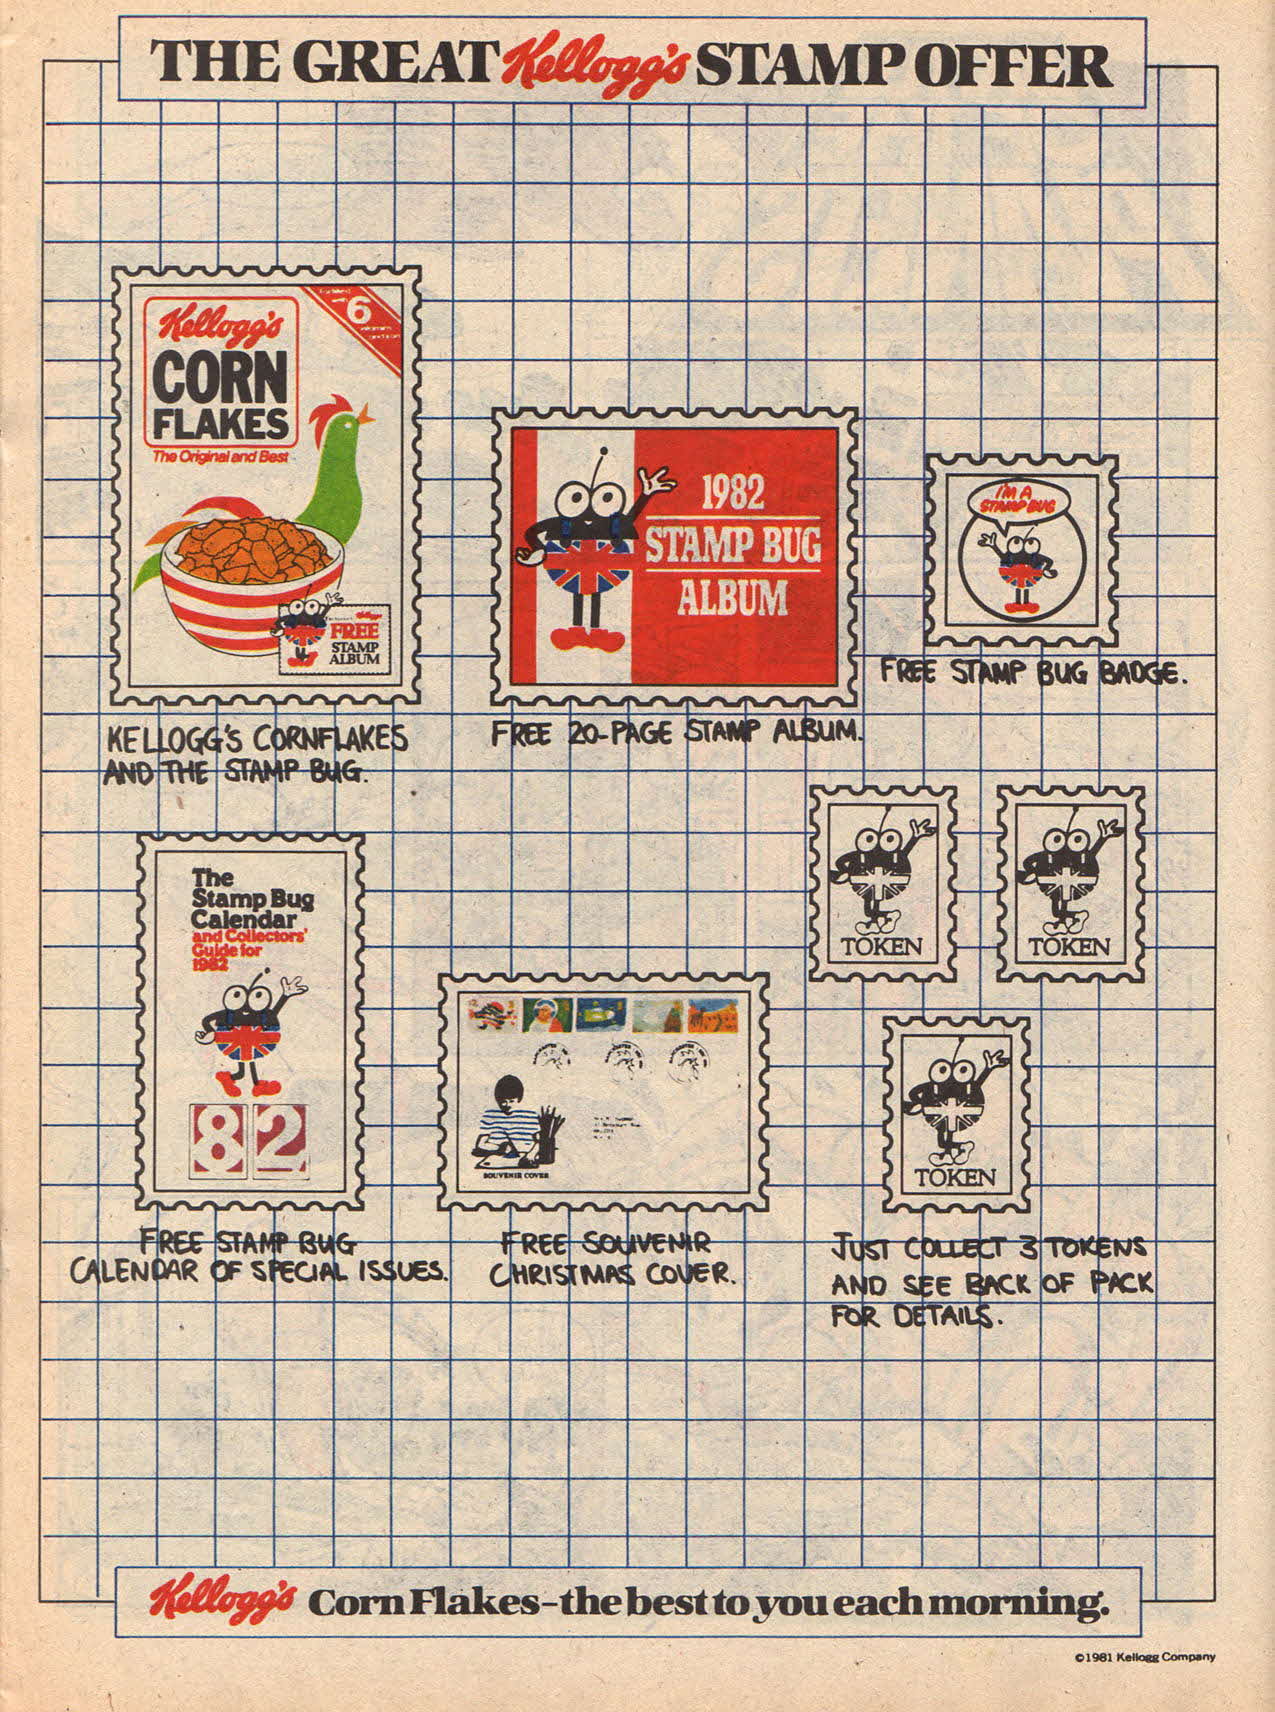 1981 Cornflakes Stamp Offer Christmas